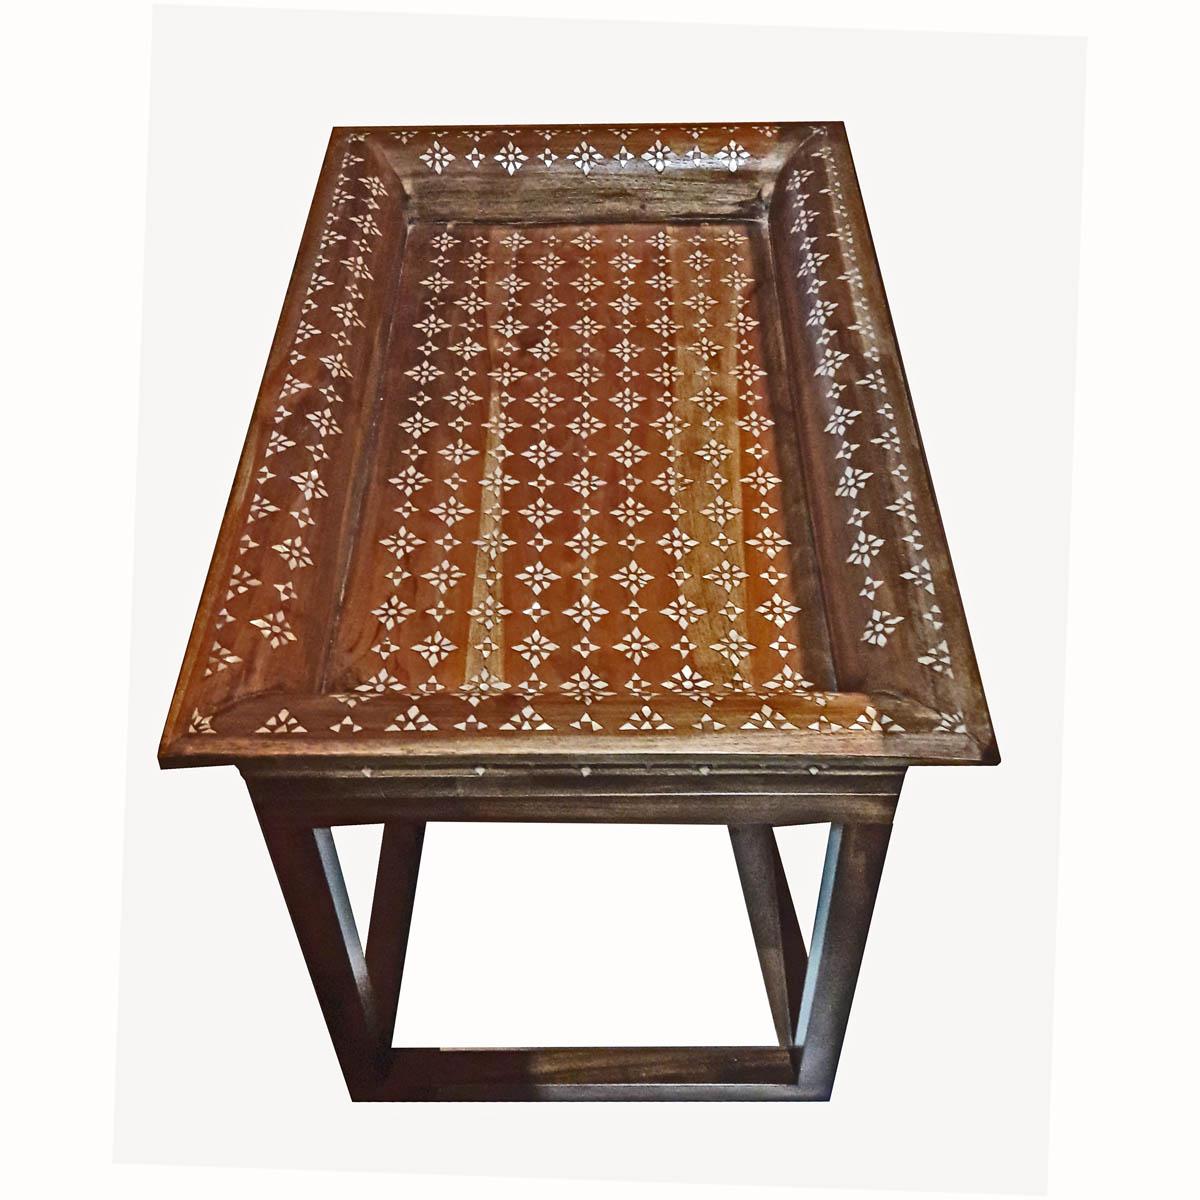 Inlay Mother-of-Pearl Inlaid Tray Table from India